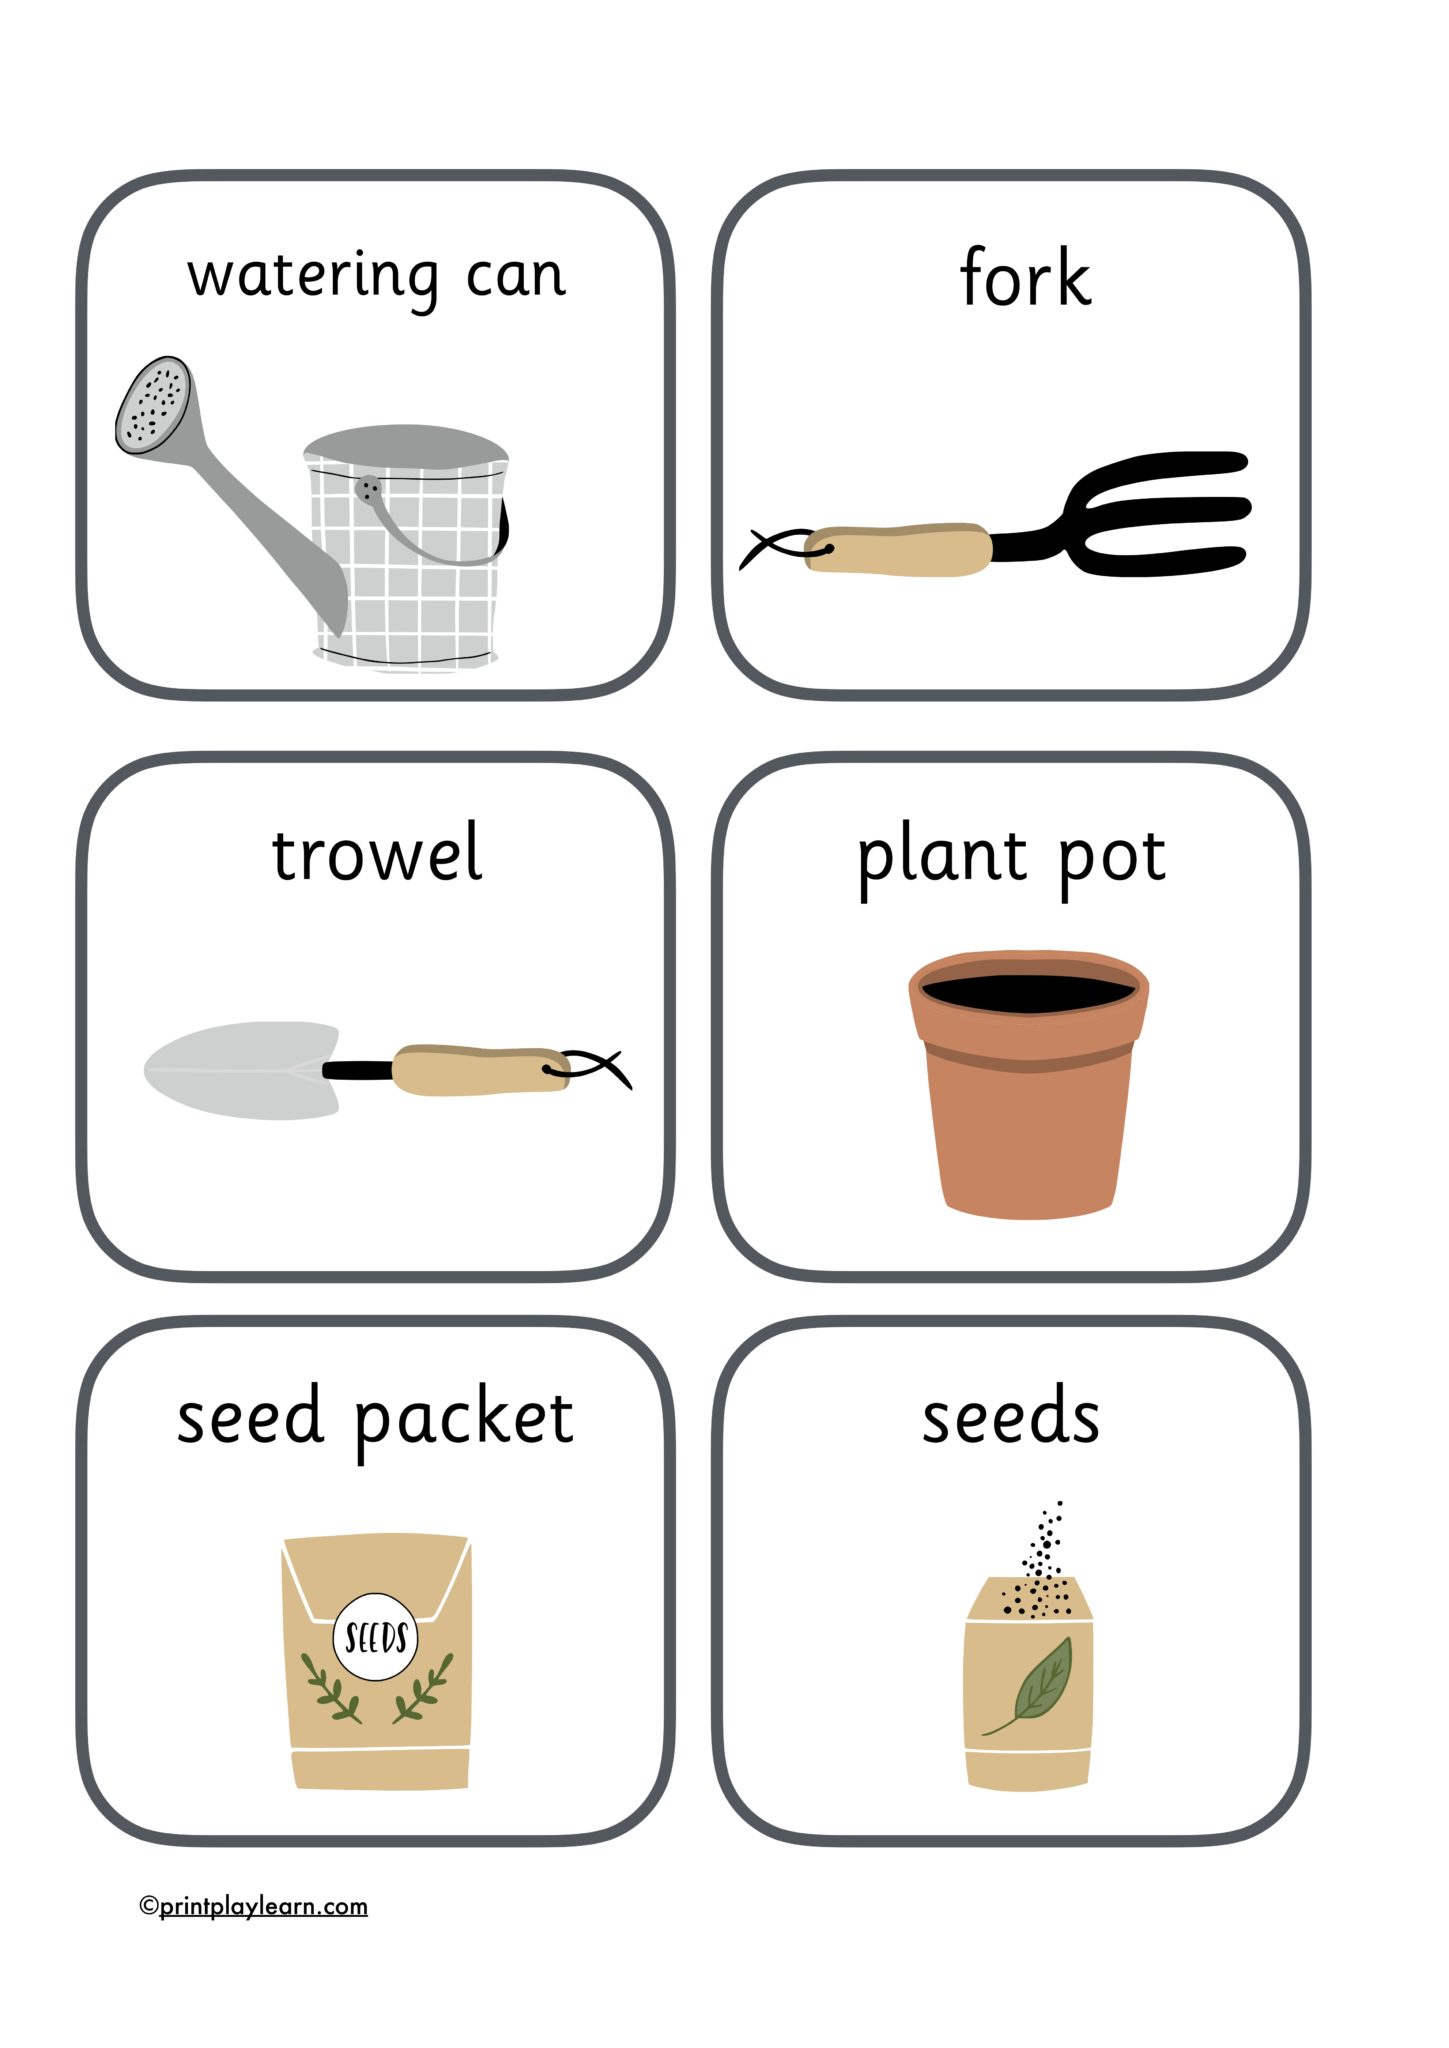 gardening tools flashcards printable teaching resources print play learn